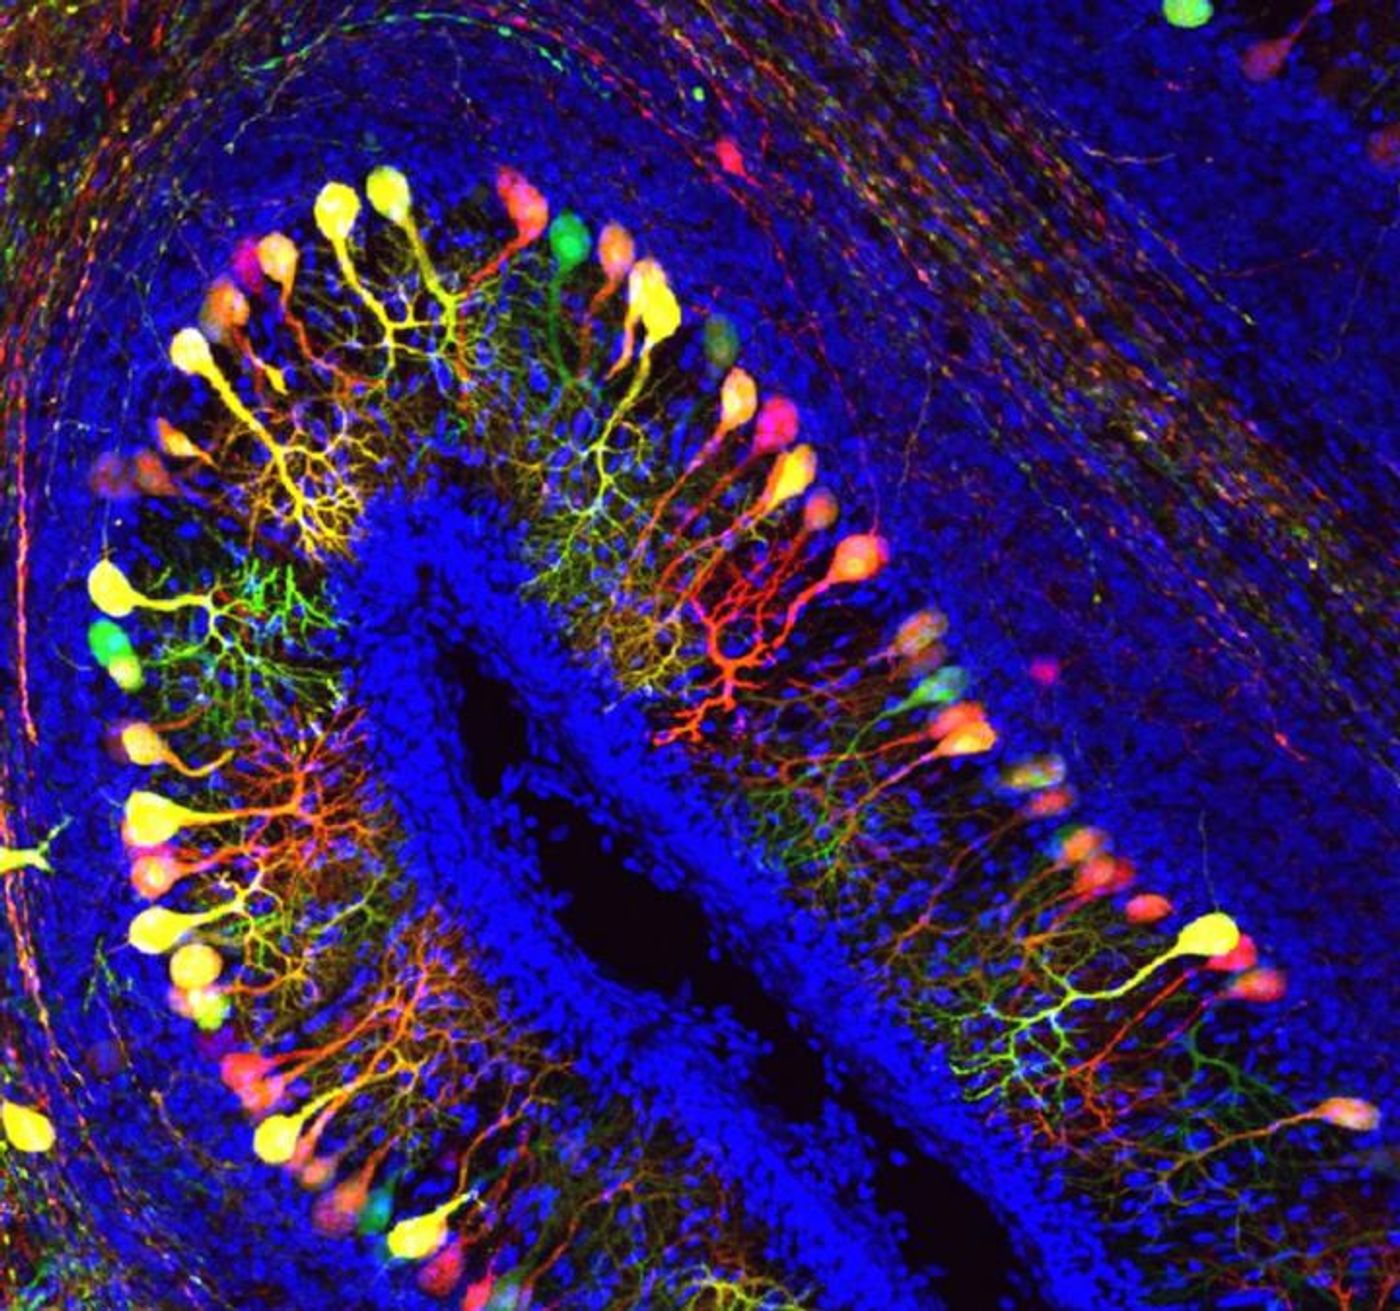 A cross-section of the folded cerebellar cortex or 'little brain' of a chicken embryo, with 3 layers of cells. The middle layer consists of Purkinje cells with their characteristic dendritic branches. This image shows healthy Purkinje cells, highlighted in bright colors. With a deactivated MCT8 transporter, the Purkinje cells would have much smaller dendritic branches. / Credit: KU Leuven Lab of Comparative Endocrinology - Joke Delbaere & Pieter Vancamp